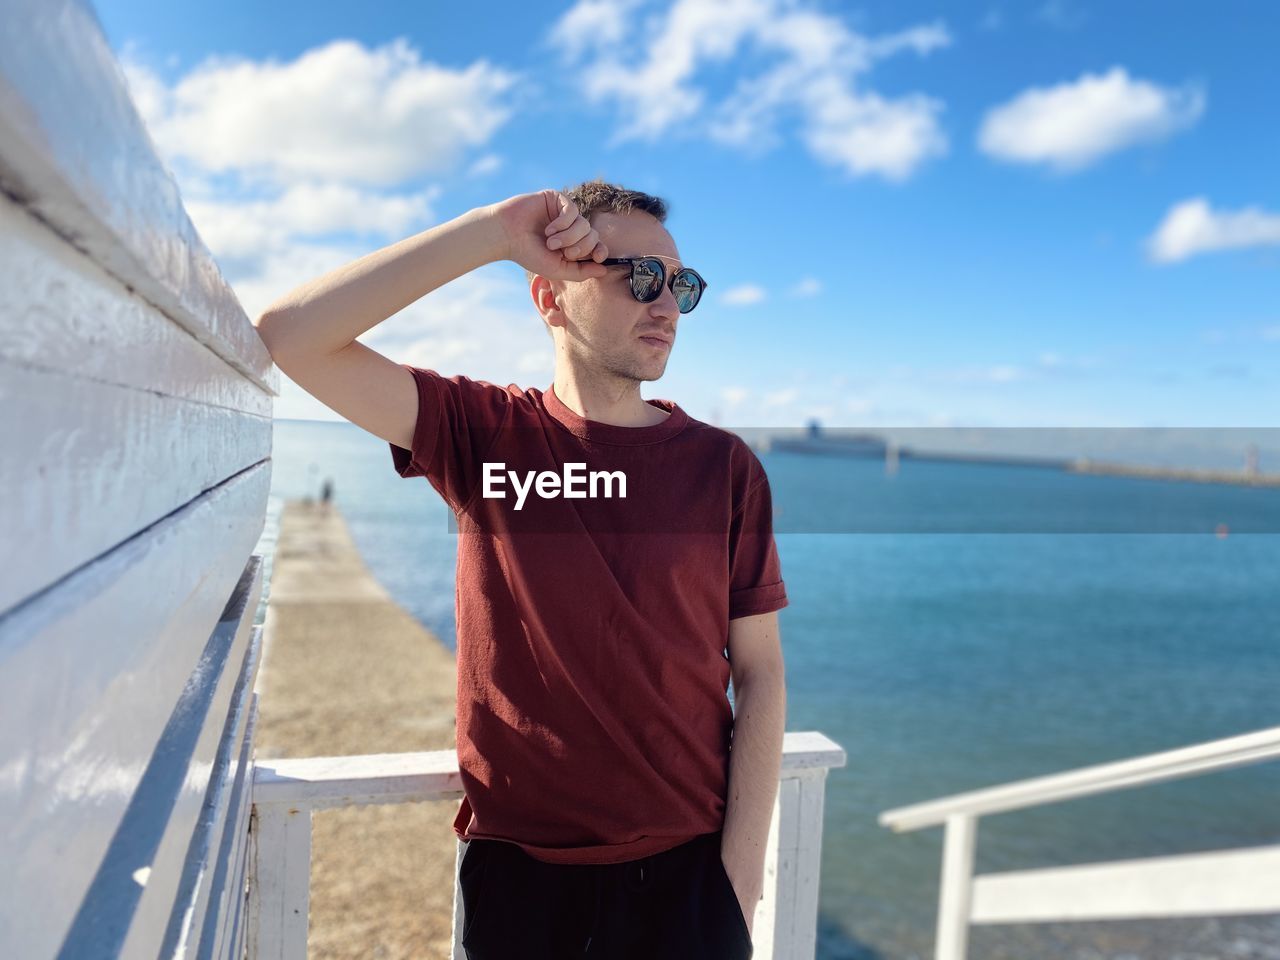 Man wearing sunglasses standing by railing against sea